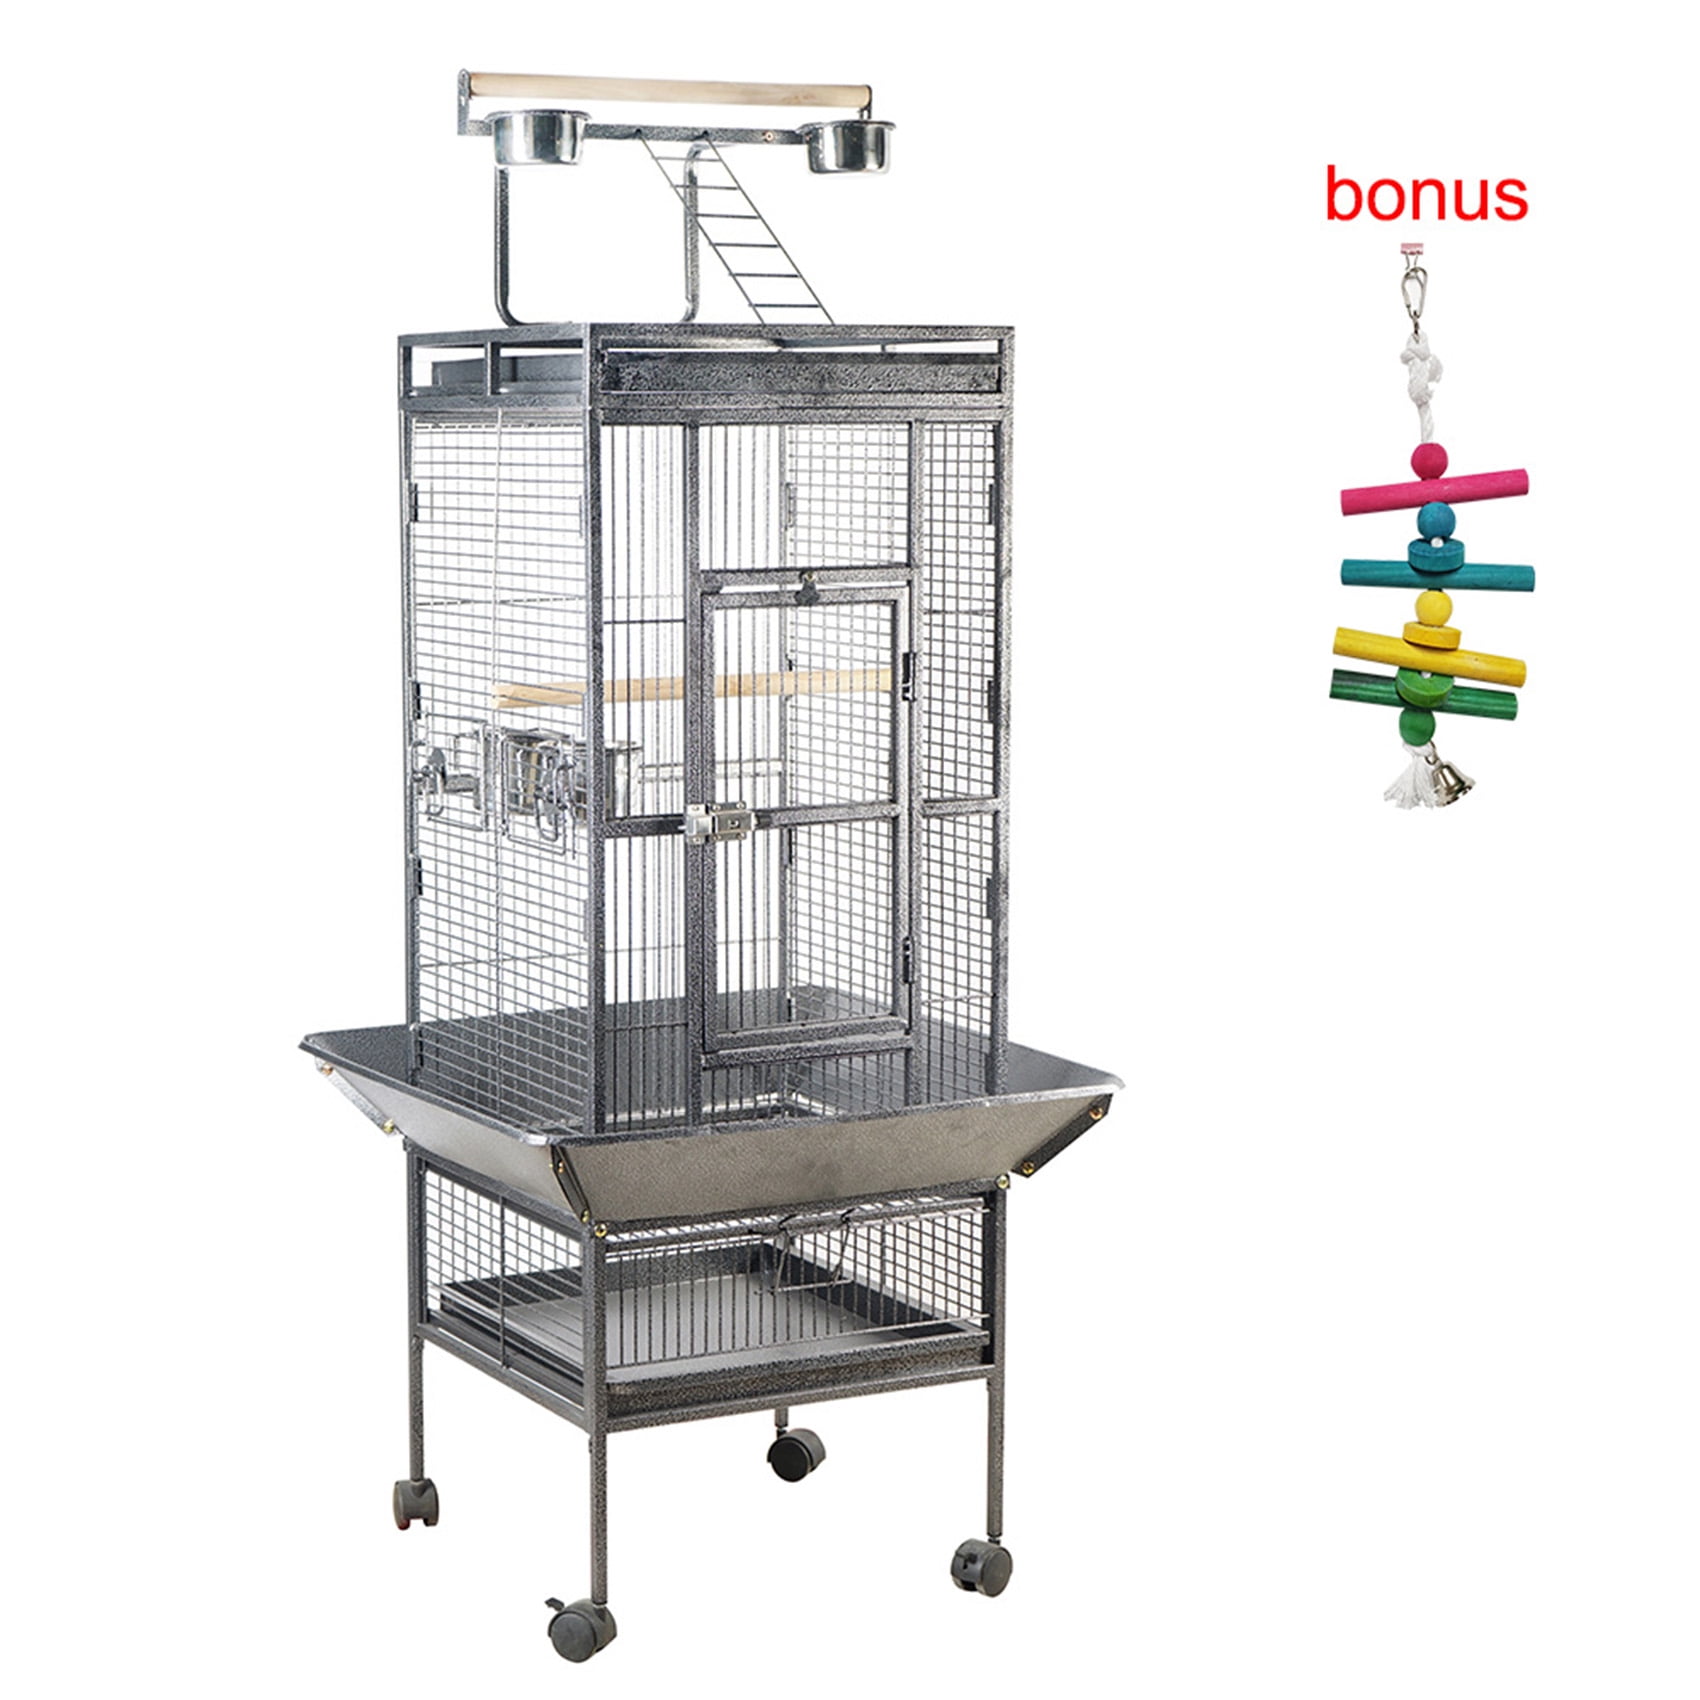 18"x18" Quality Parror cage Parrot Macaw Canary Finch Breeding cage Metal Cage 